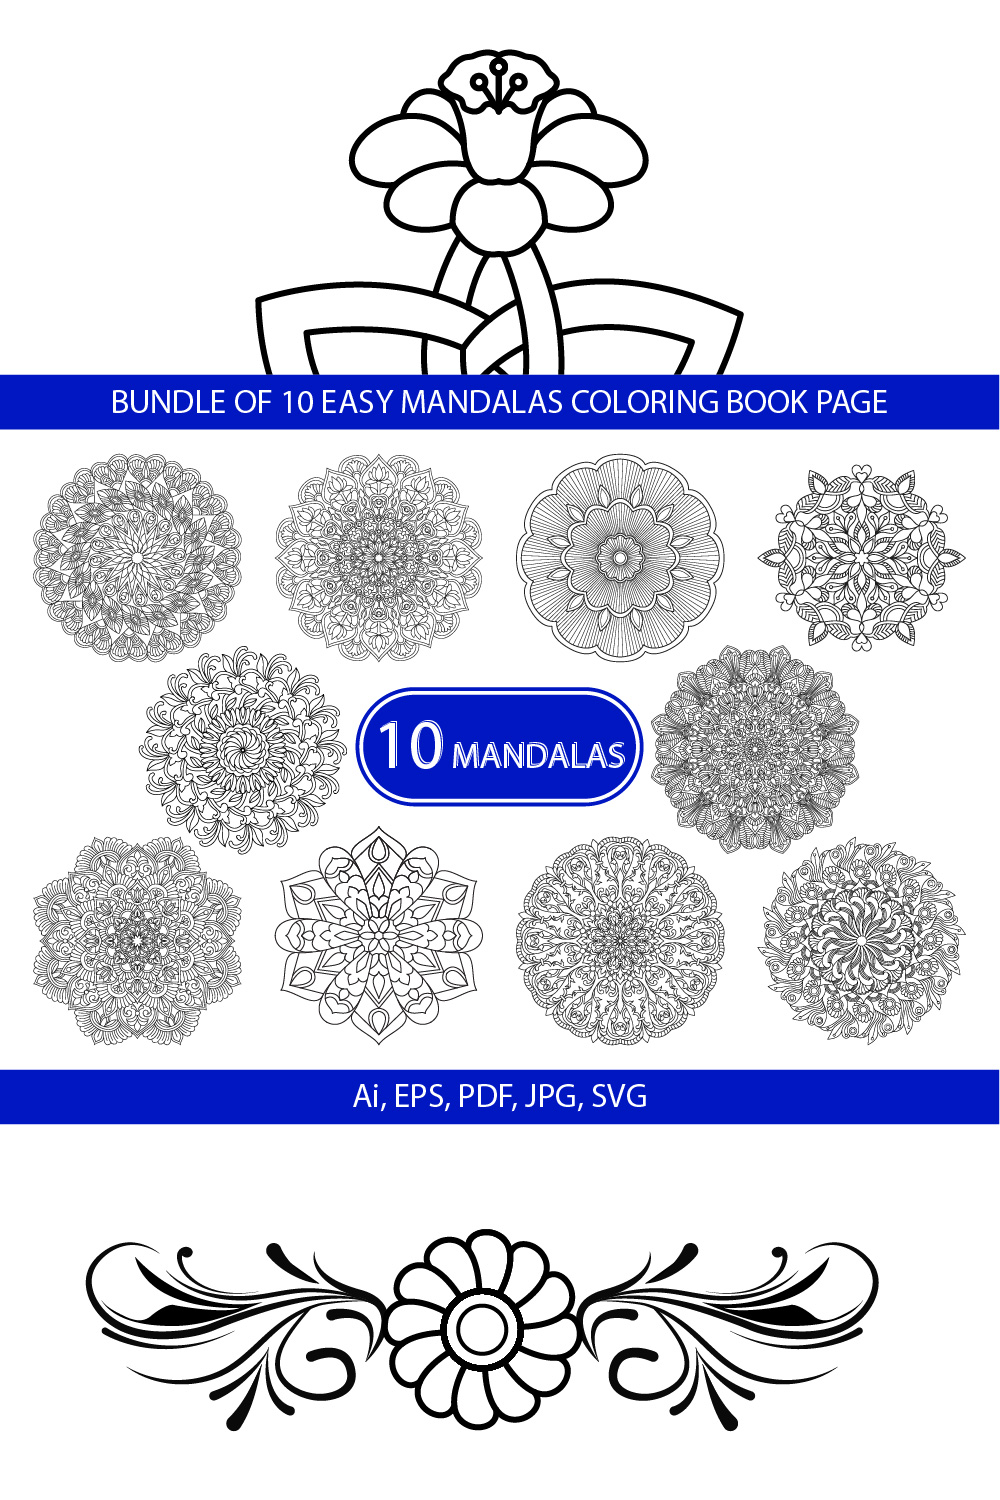 Bundle of 10 Easy Mandalas Coloring Book Page pinterest preview image.